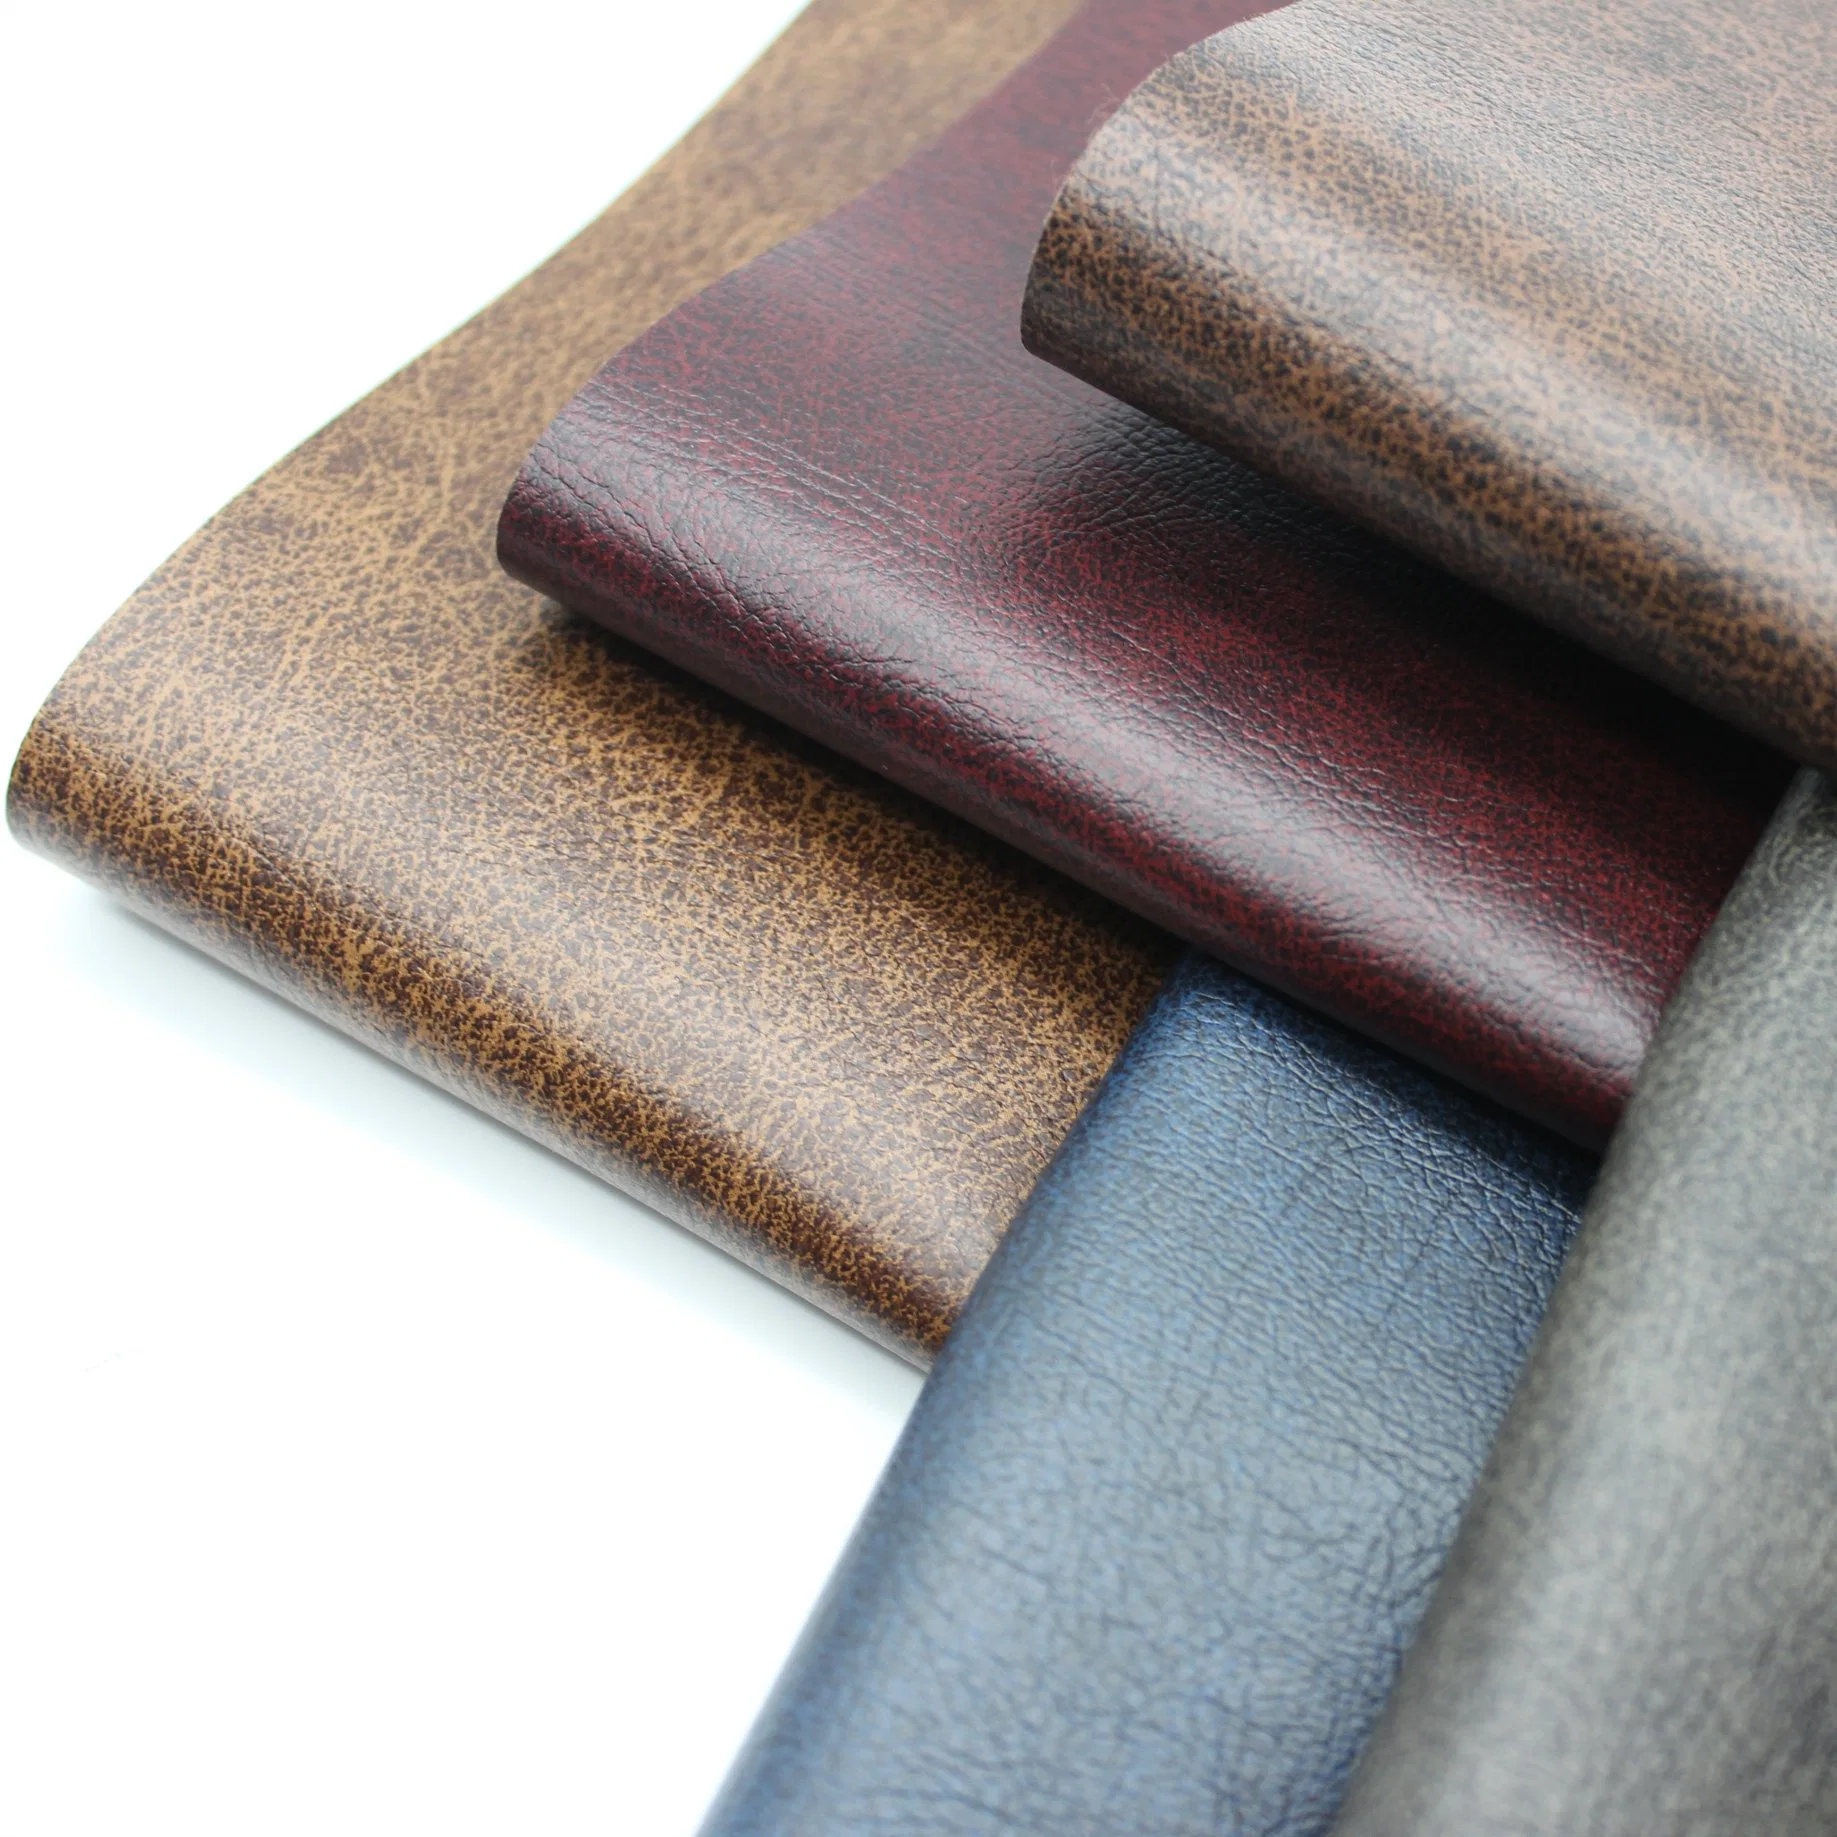 Instead of Genuine Eco-Friendly PU Coated Bovine Recycled Bonded Vegan Leather for Furniture Sofa Chair Car Seat